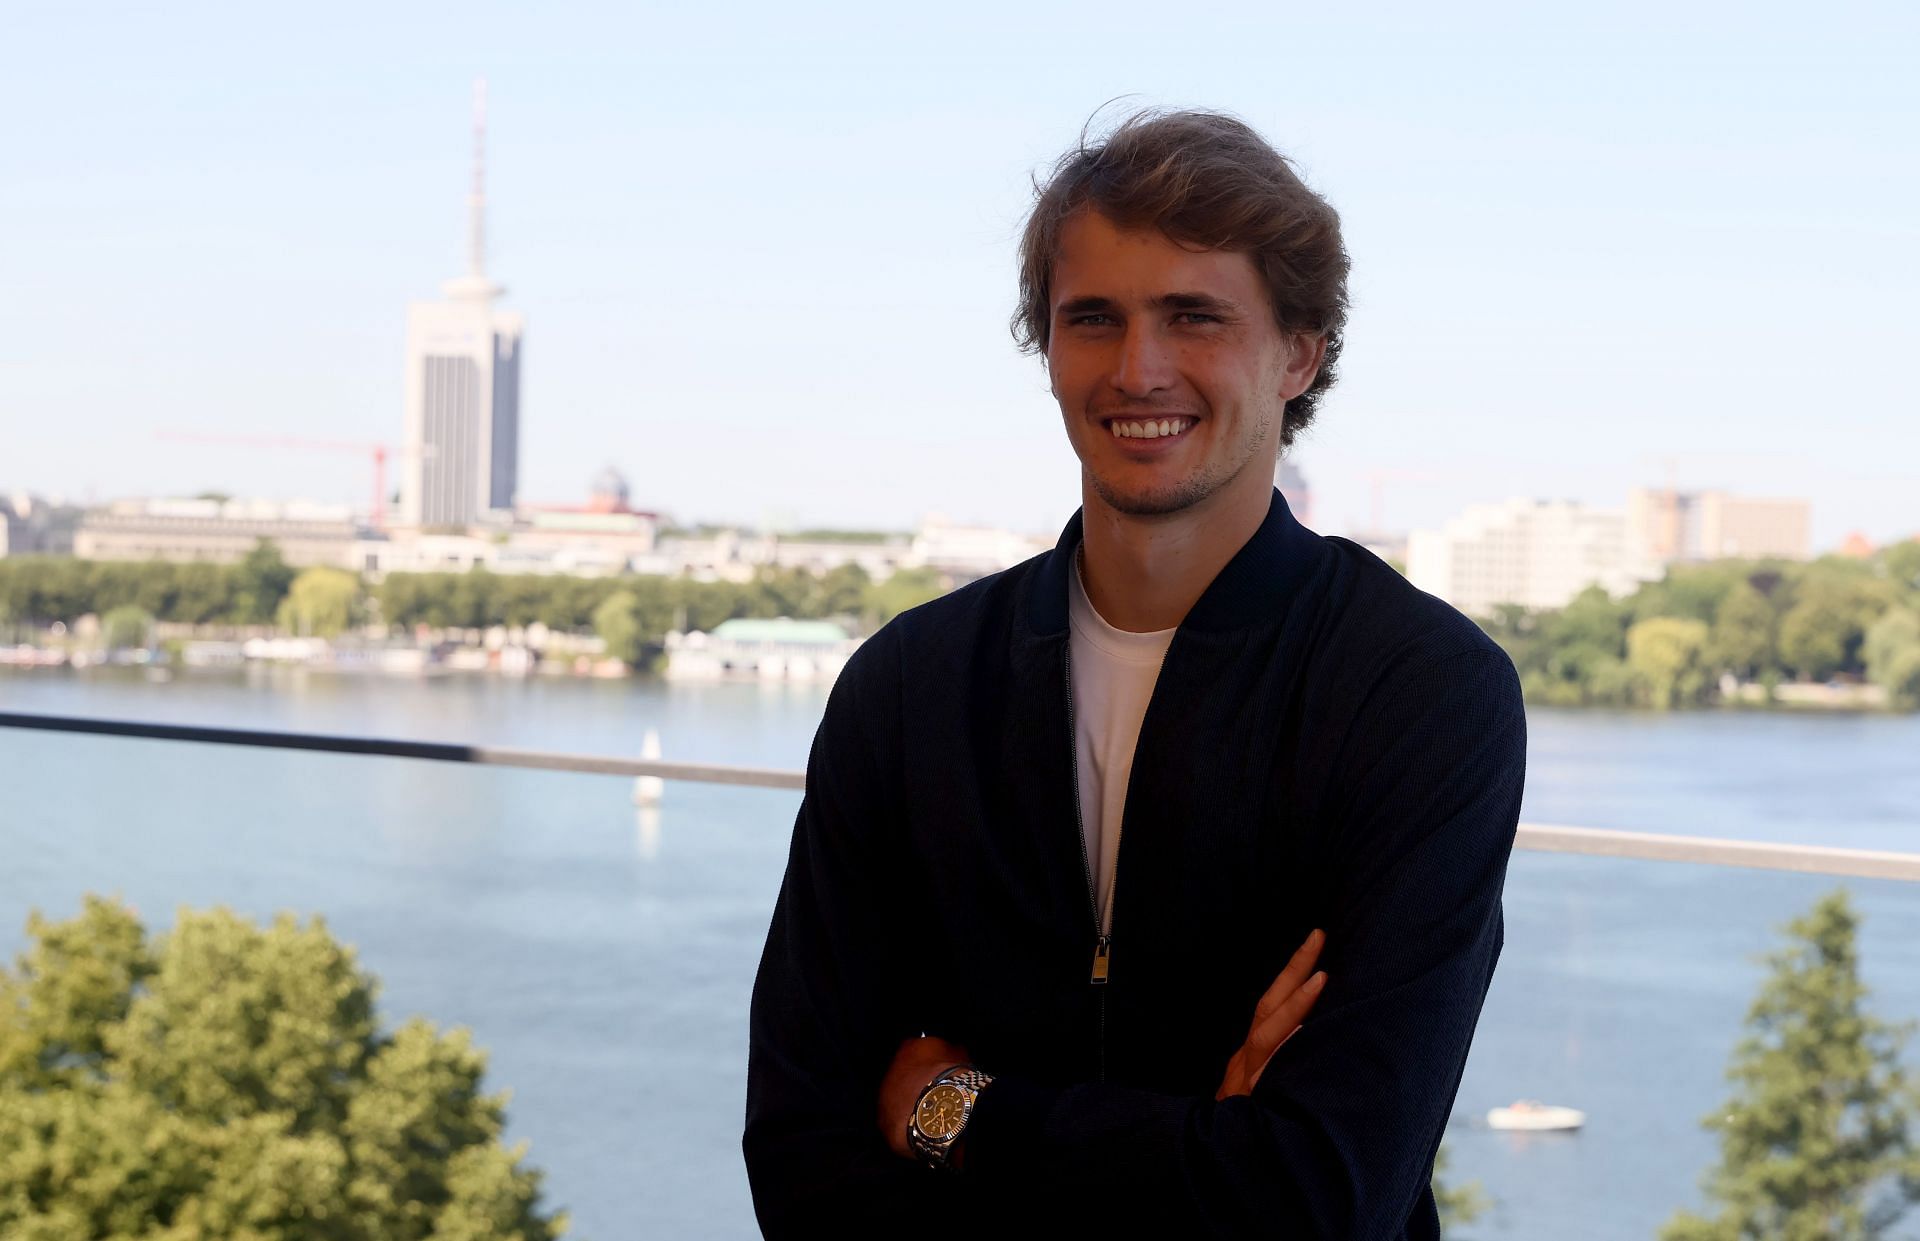 Zverev was diagnosed with diabetes early in his life.